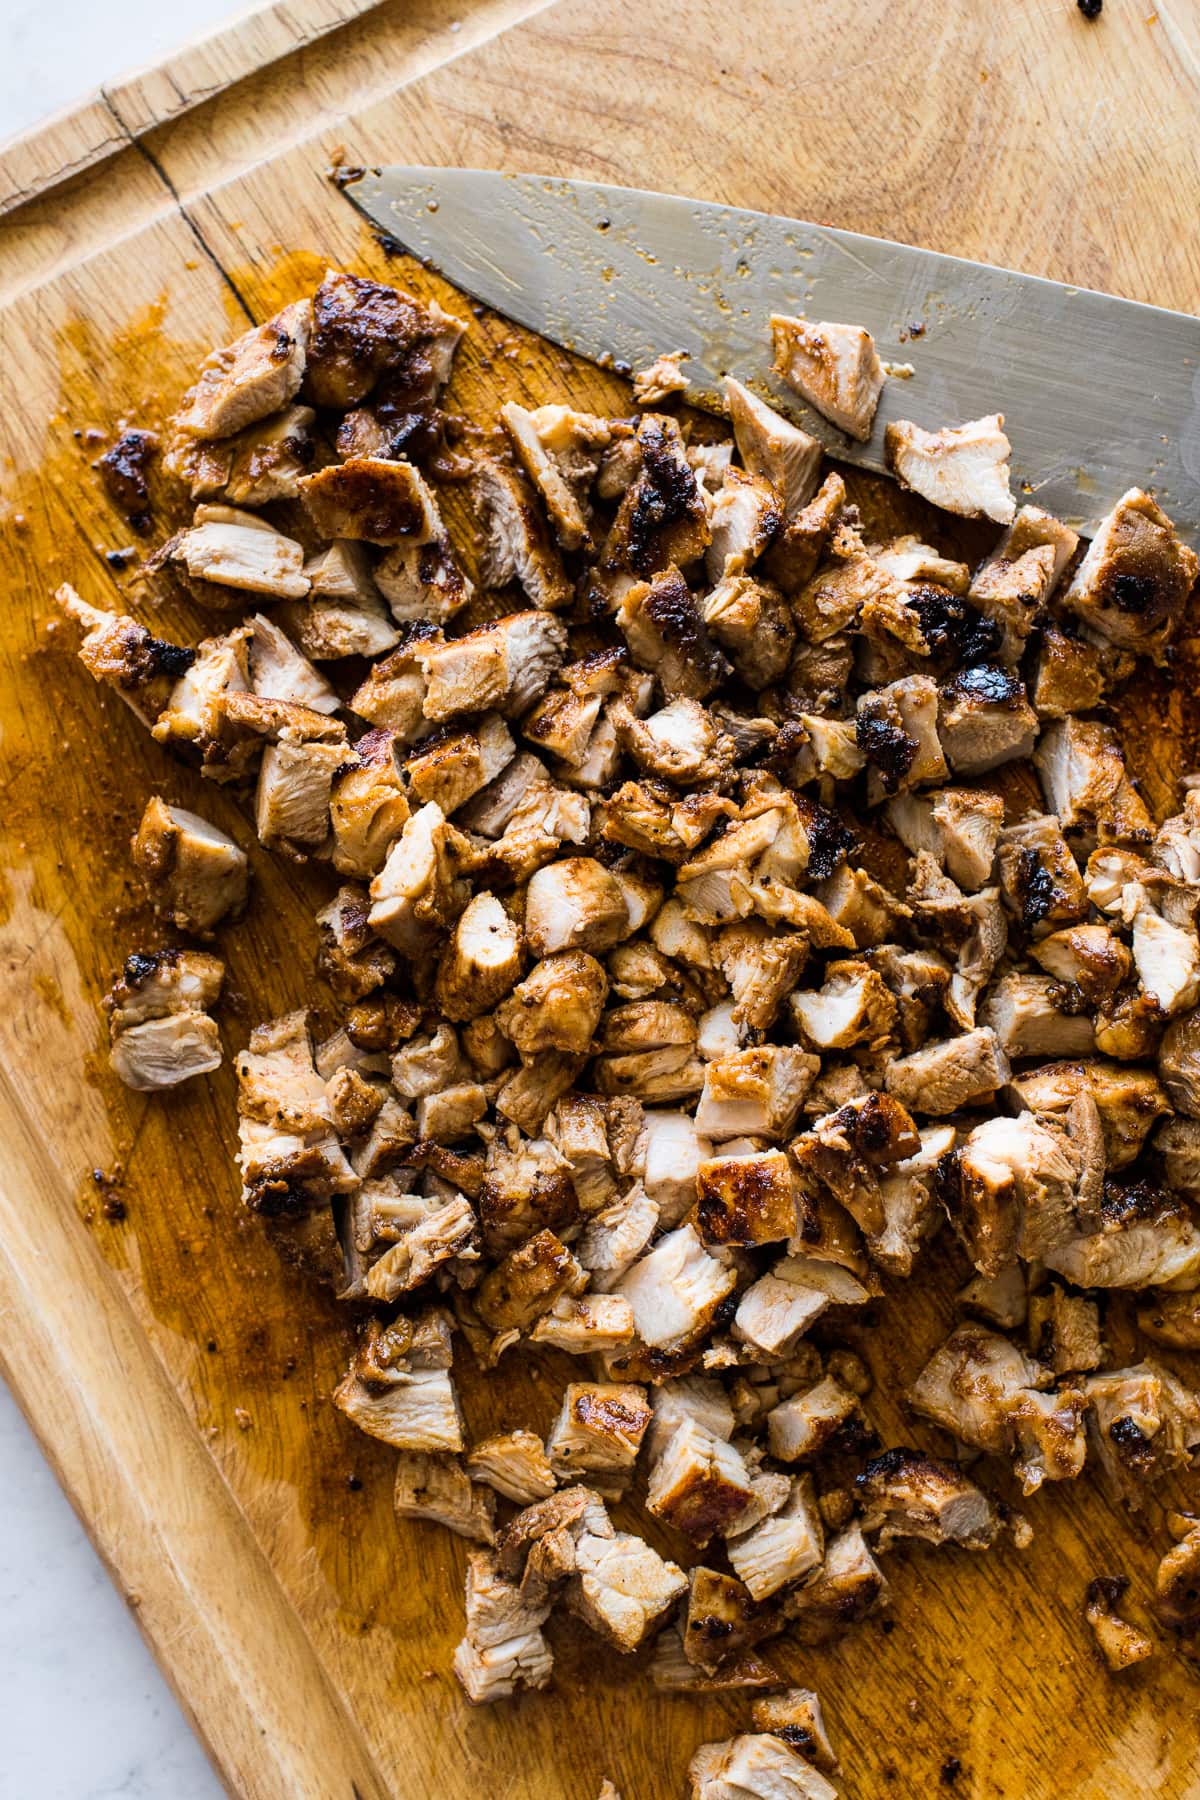 Juicy and tender diced chicken on a cutting board.